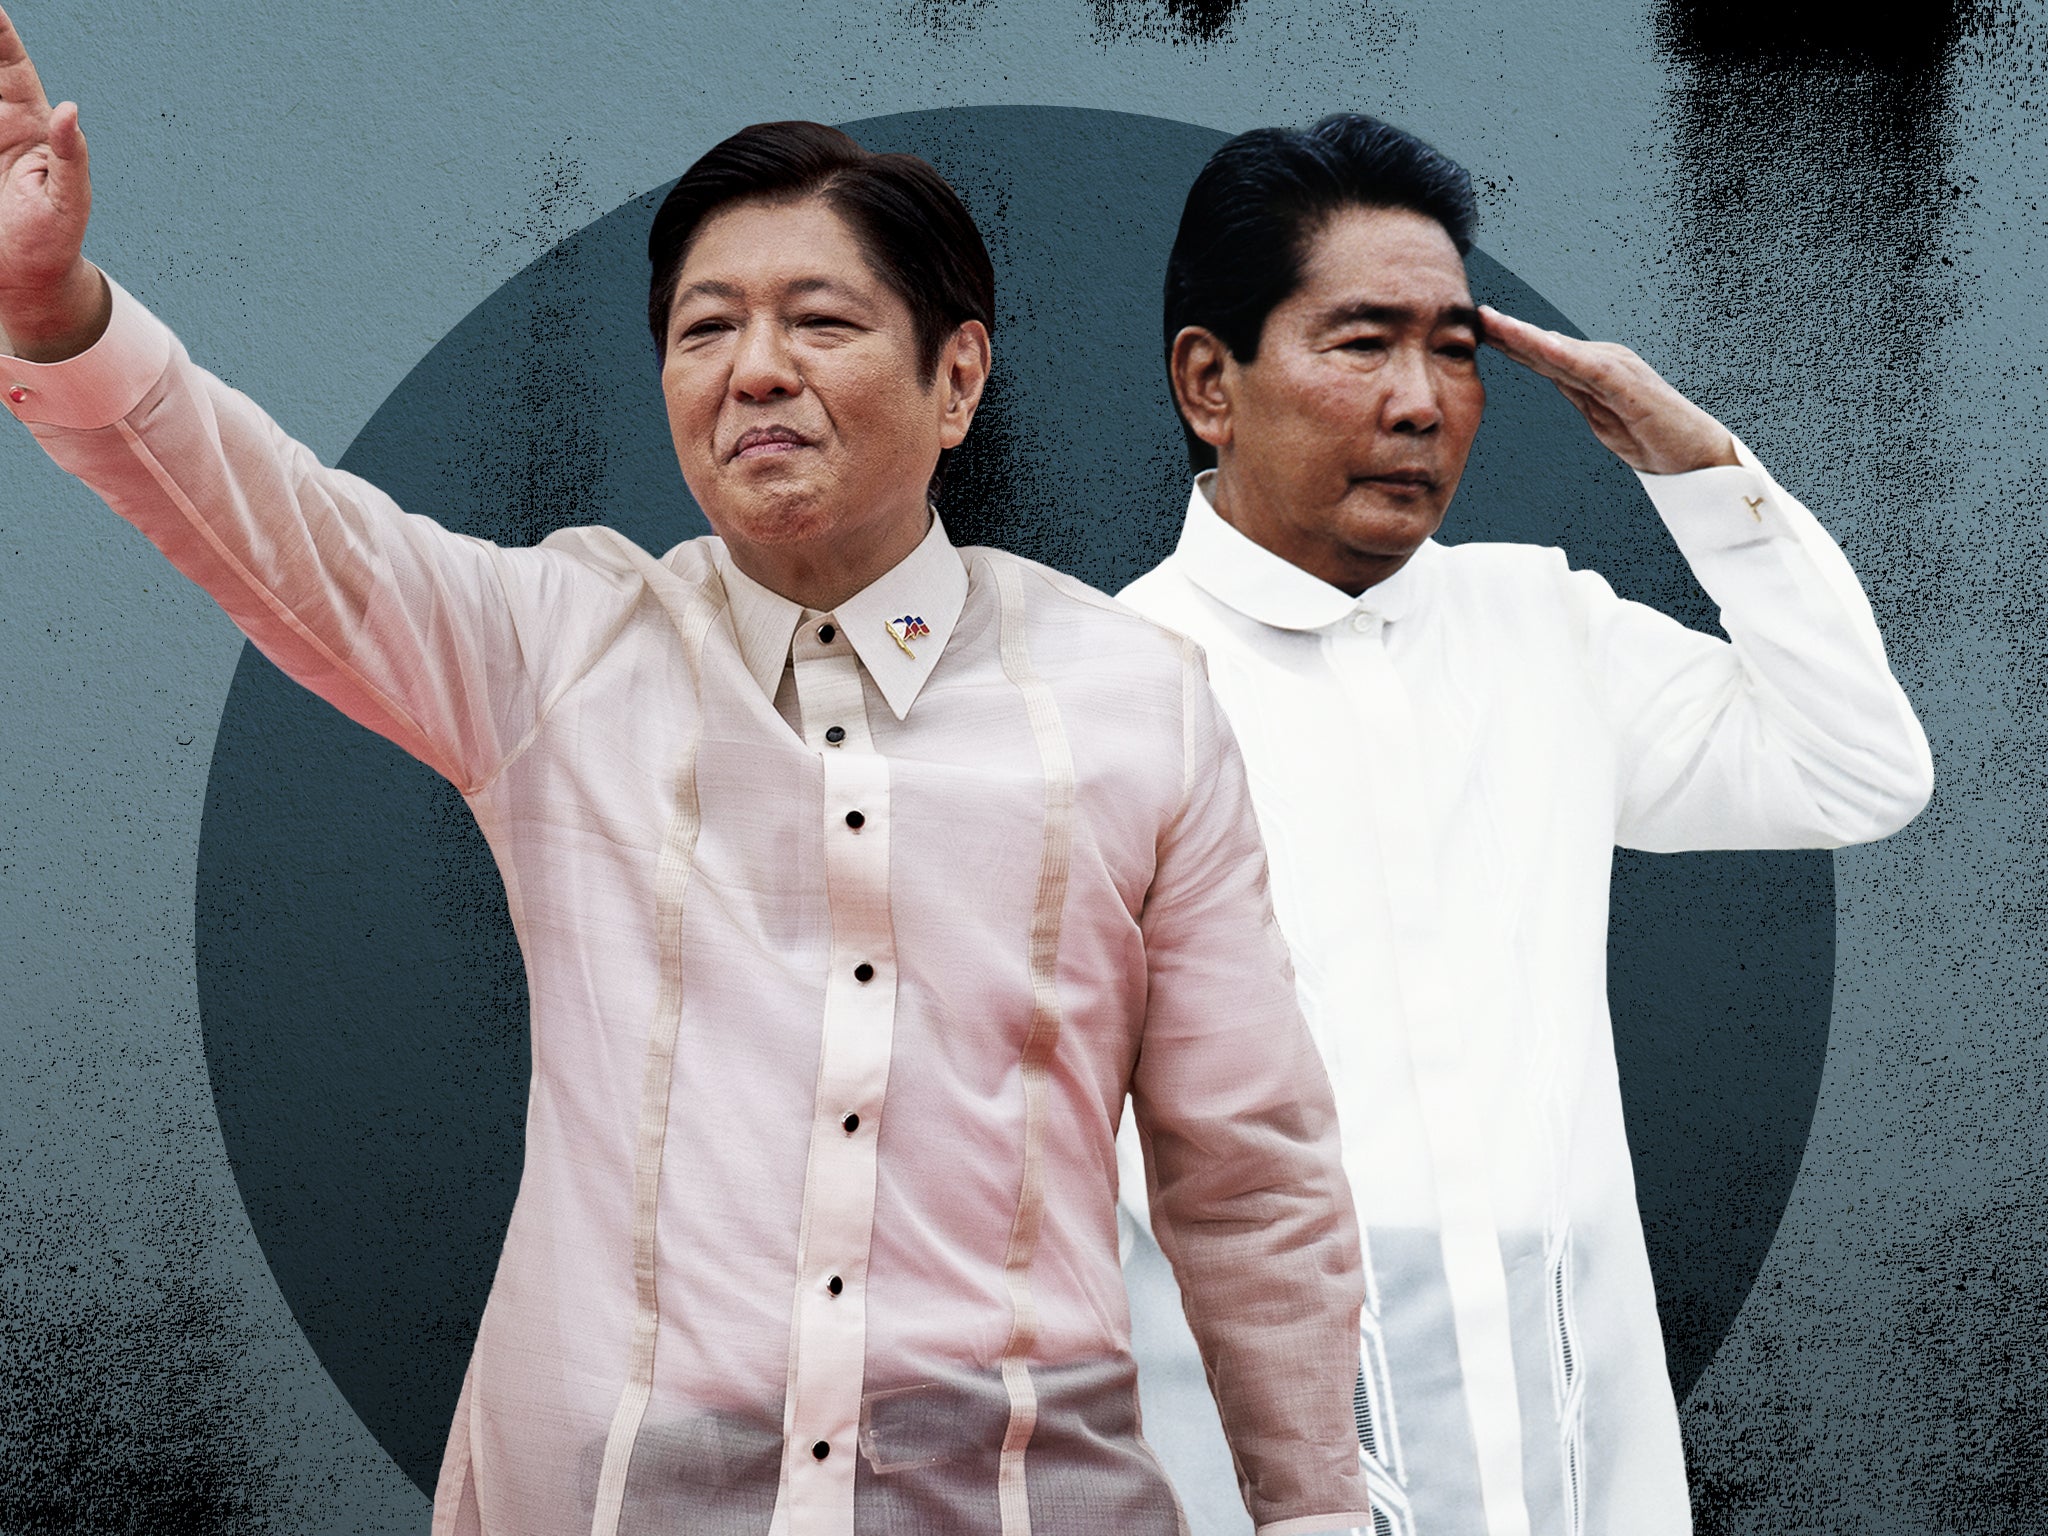 Ferdinand Marcos Jr at his inauguration ceremony today, left, and Marcos Sr during his presidency in 1985